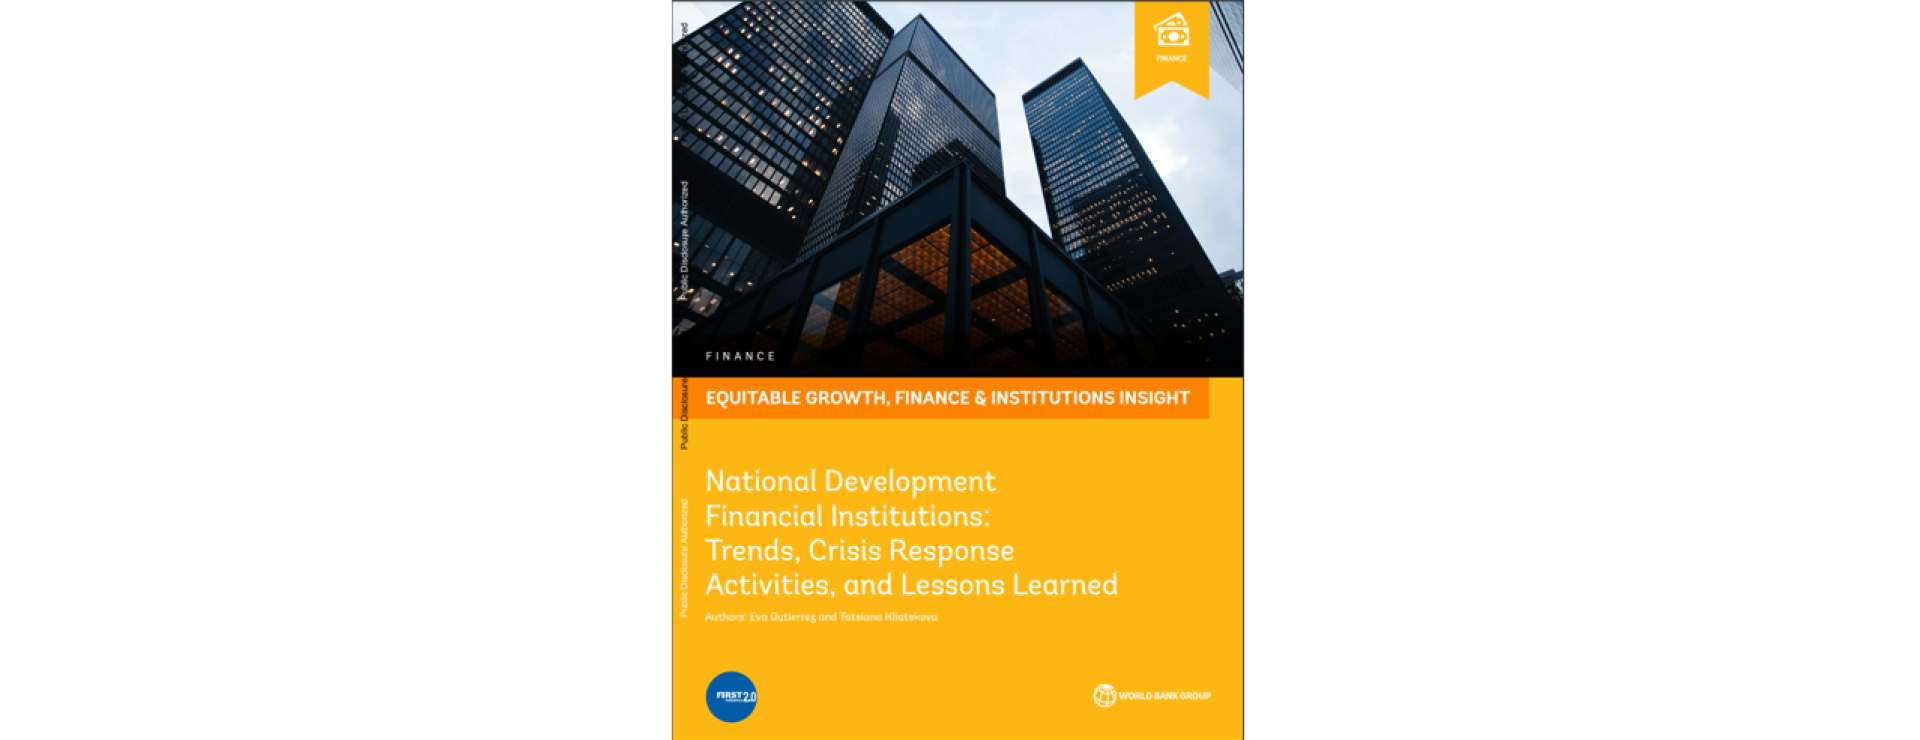 National Development Financial Institutions : Trends, Crisis Response Activities, and Lessons Learned